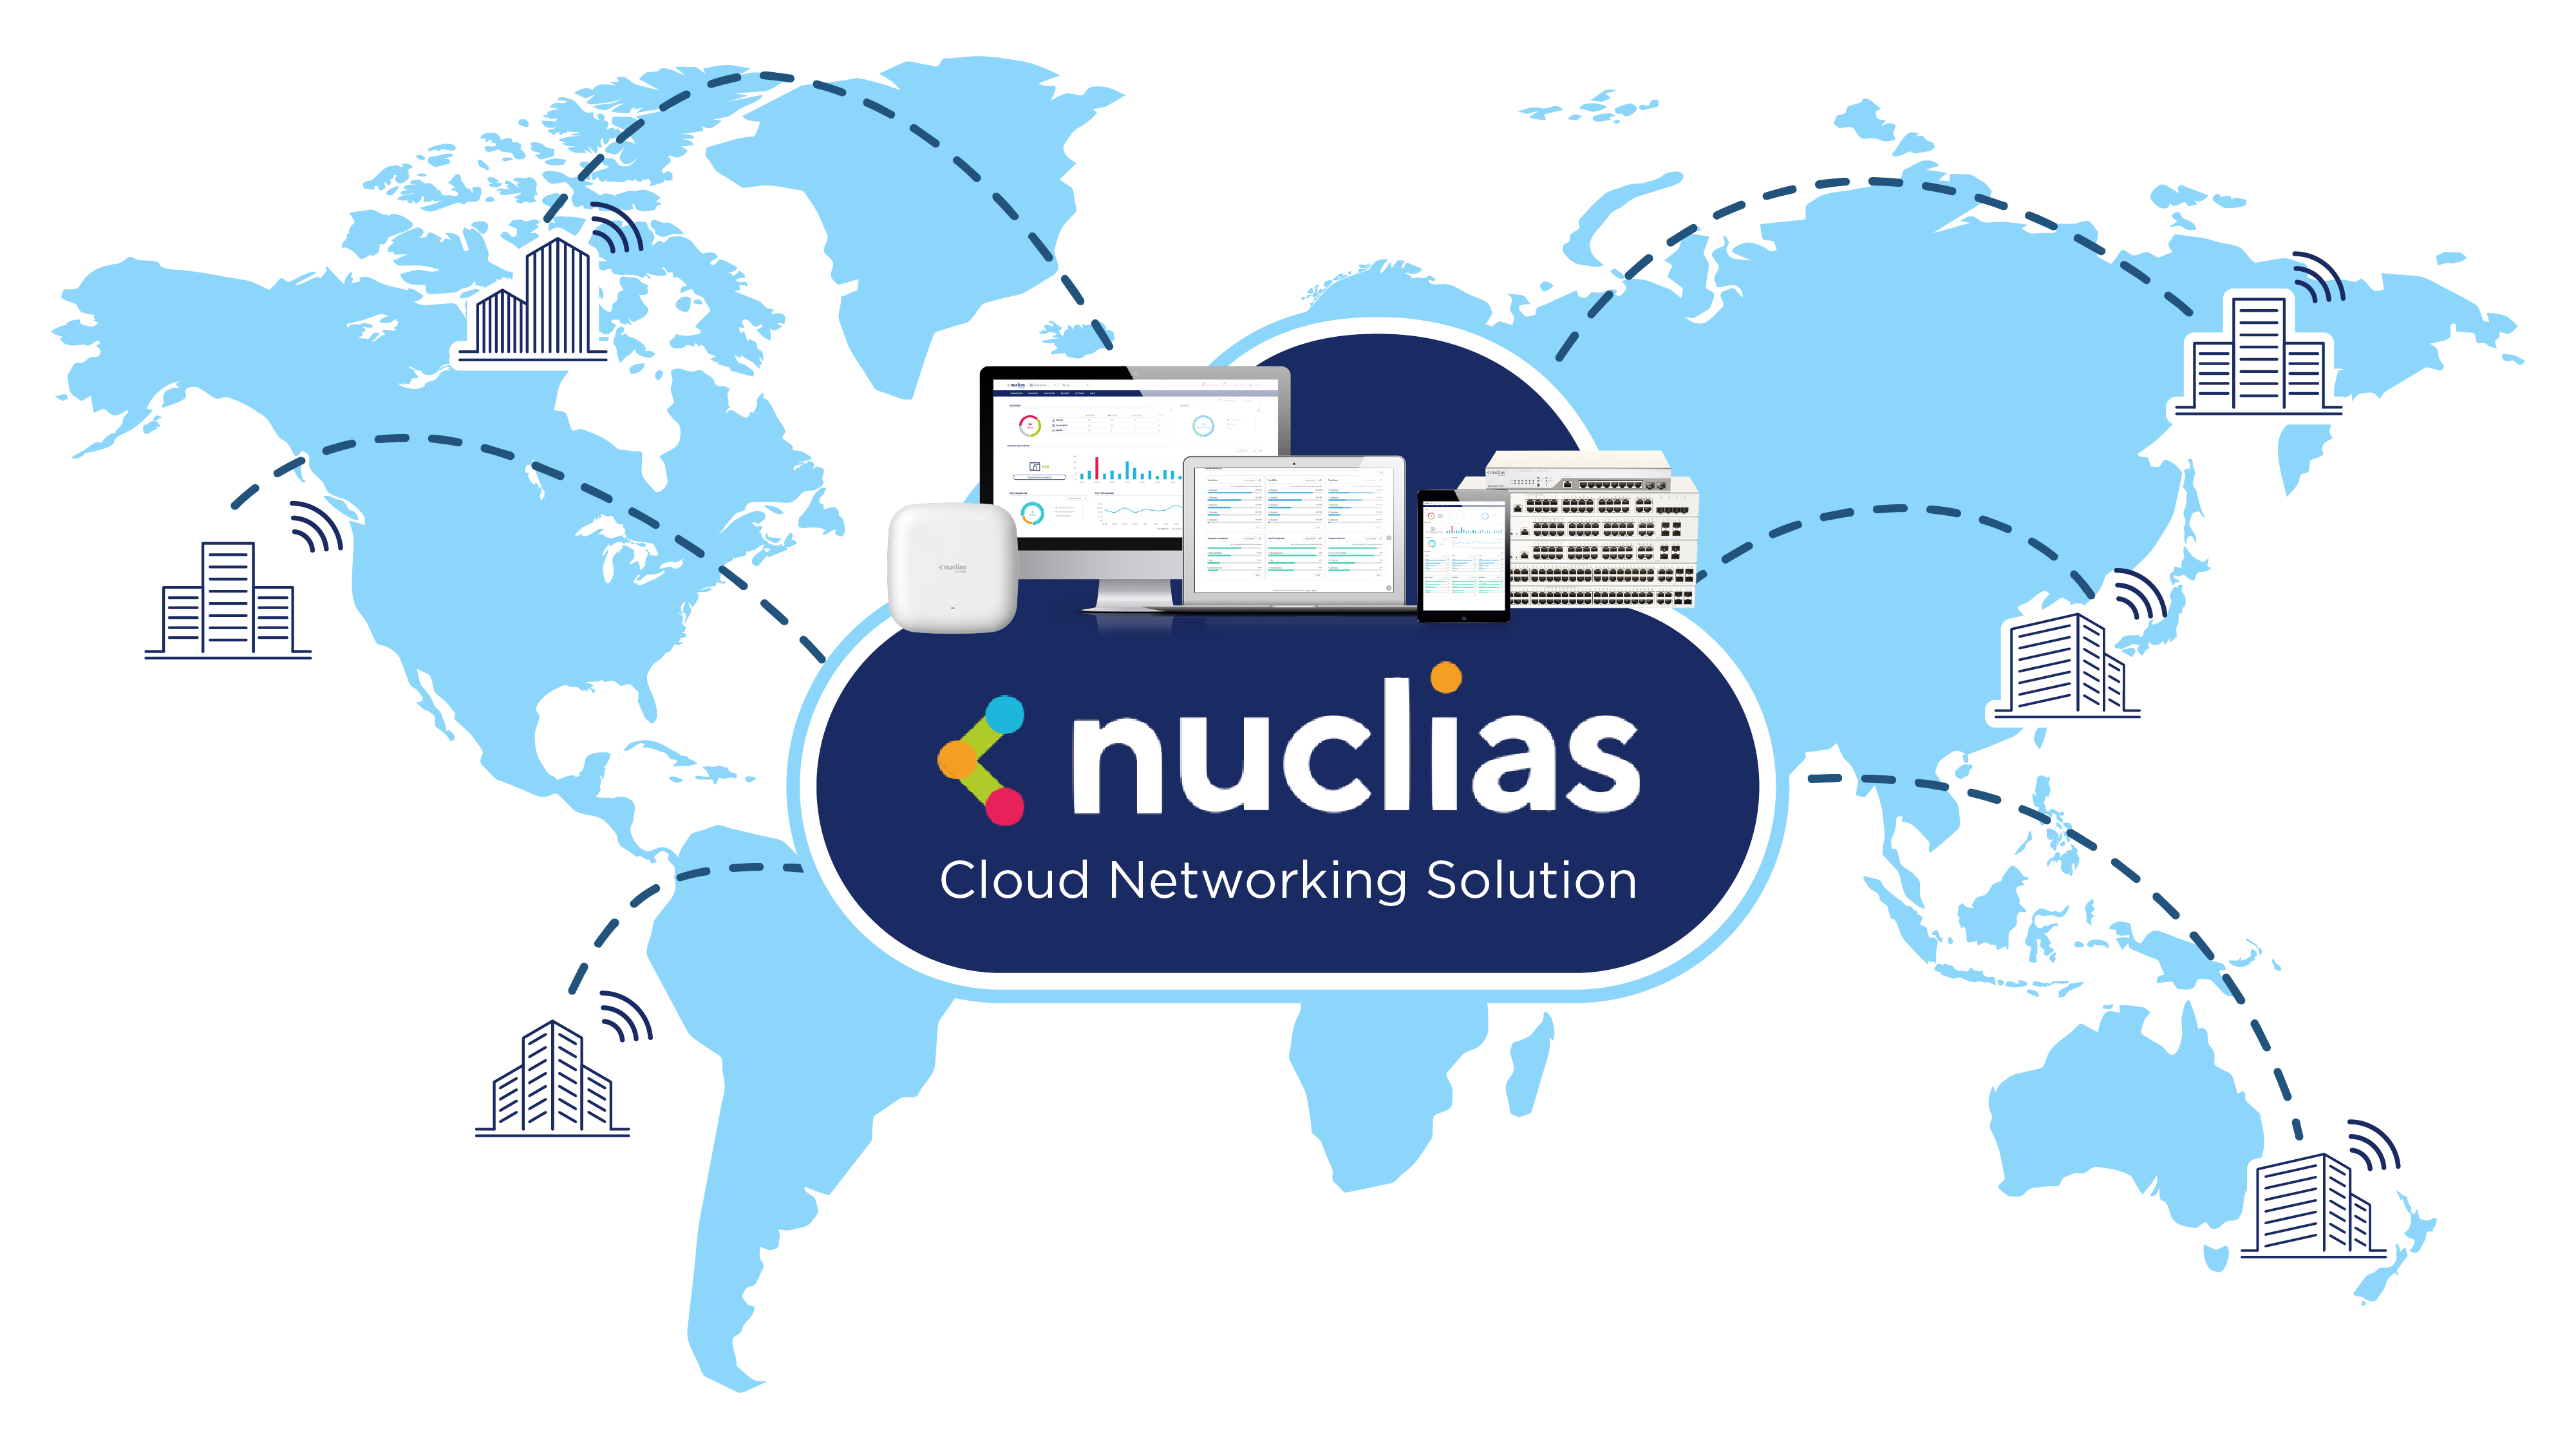 Nuclias Cloud - Cloud networking, easy and simple, as it should be